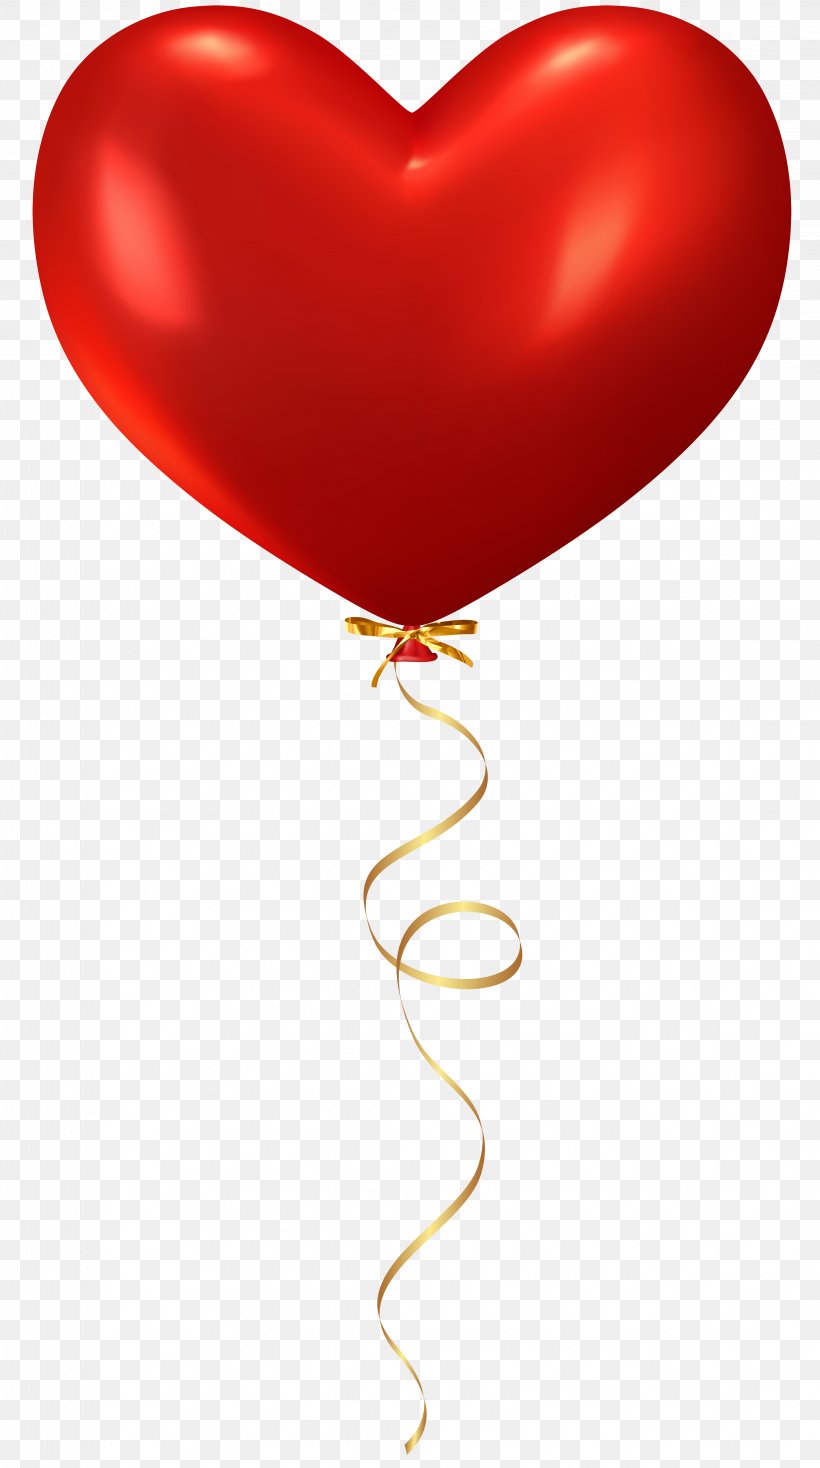 Red Balloons, PNG, 4468x8000px, Balloon, Gift, Heart, Heartshaped Balloons, Party Supply Download Free